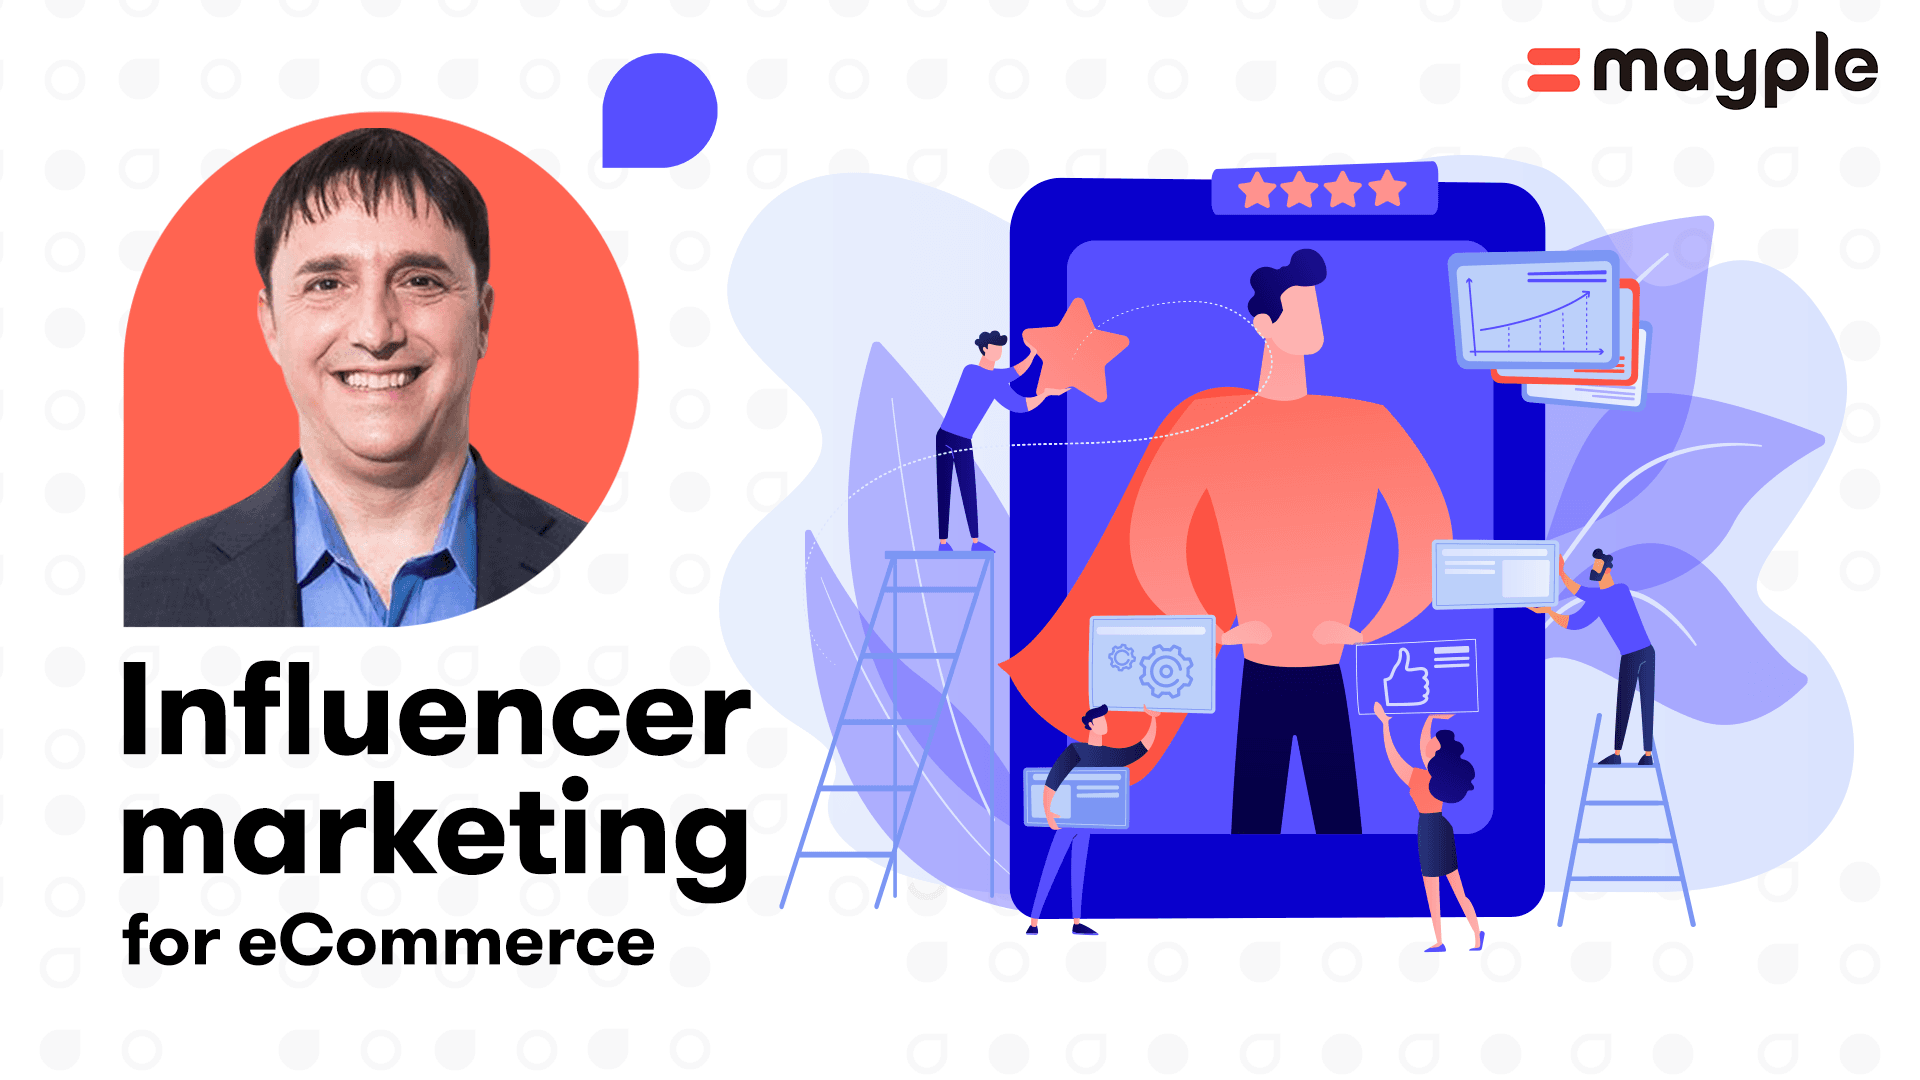 [Interview] Neal Schaffer on How to Build Relationships with eCommerce Influencers main image